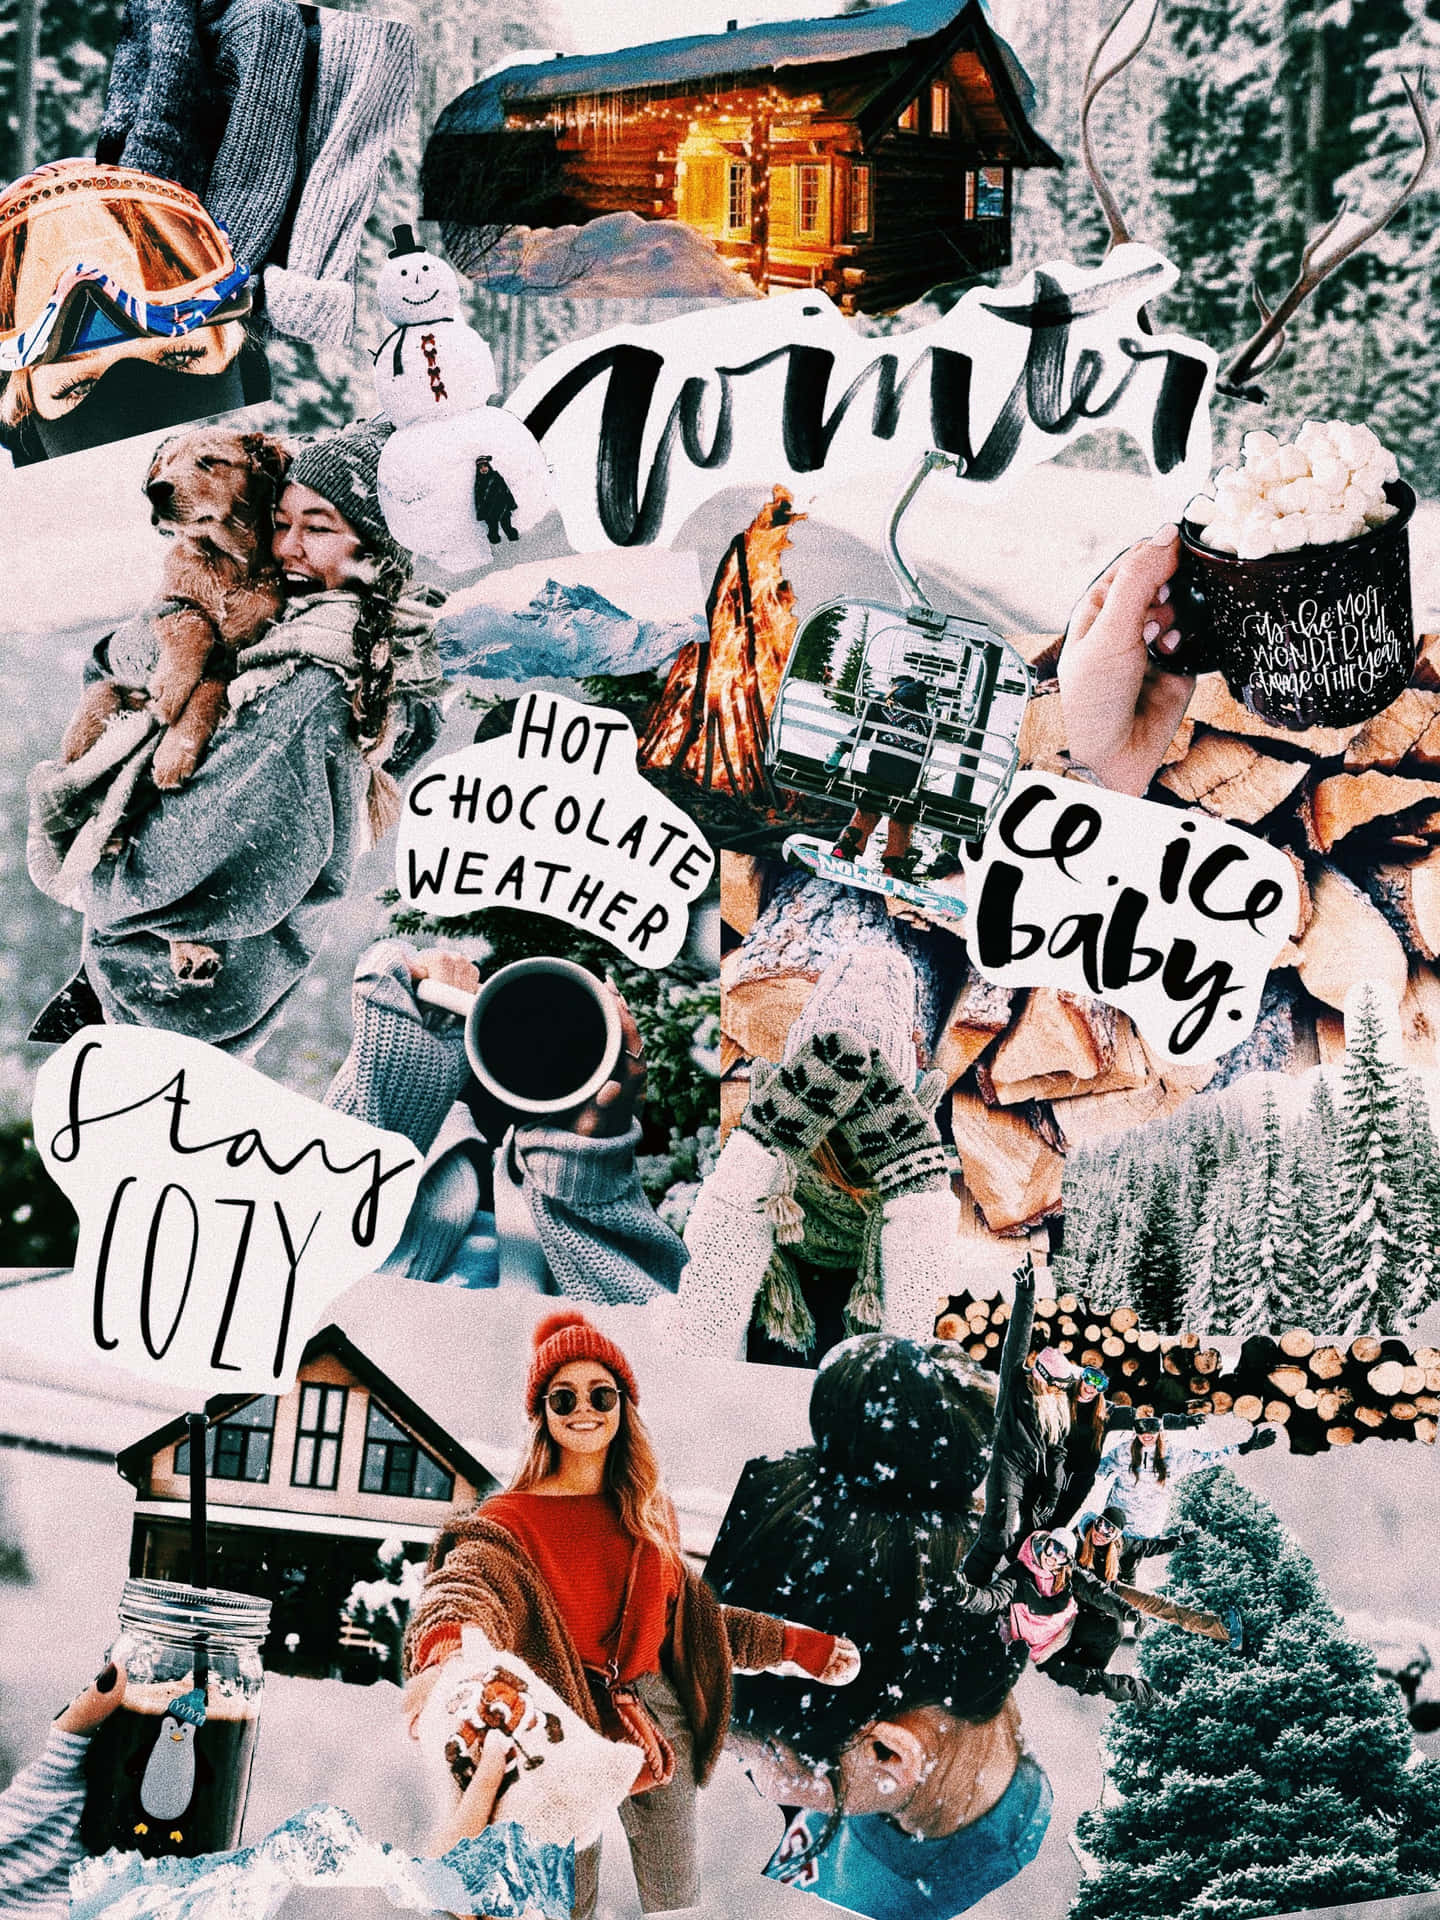 "Capture the beauty of winter in this stunning collage" Wallpaper